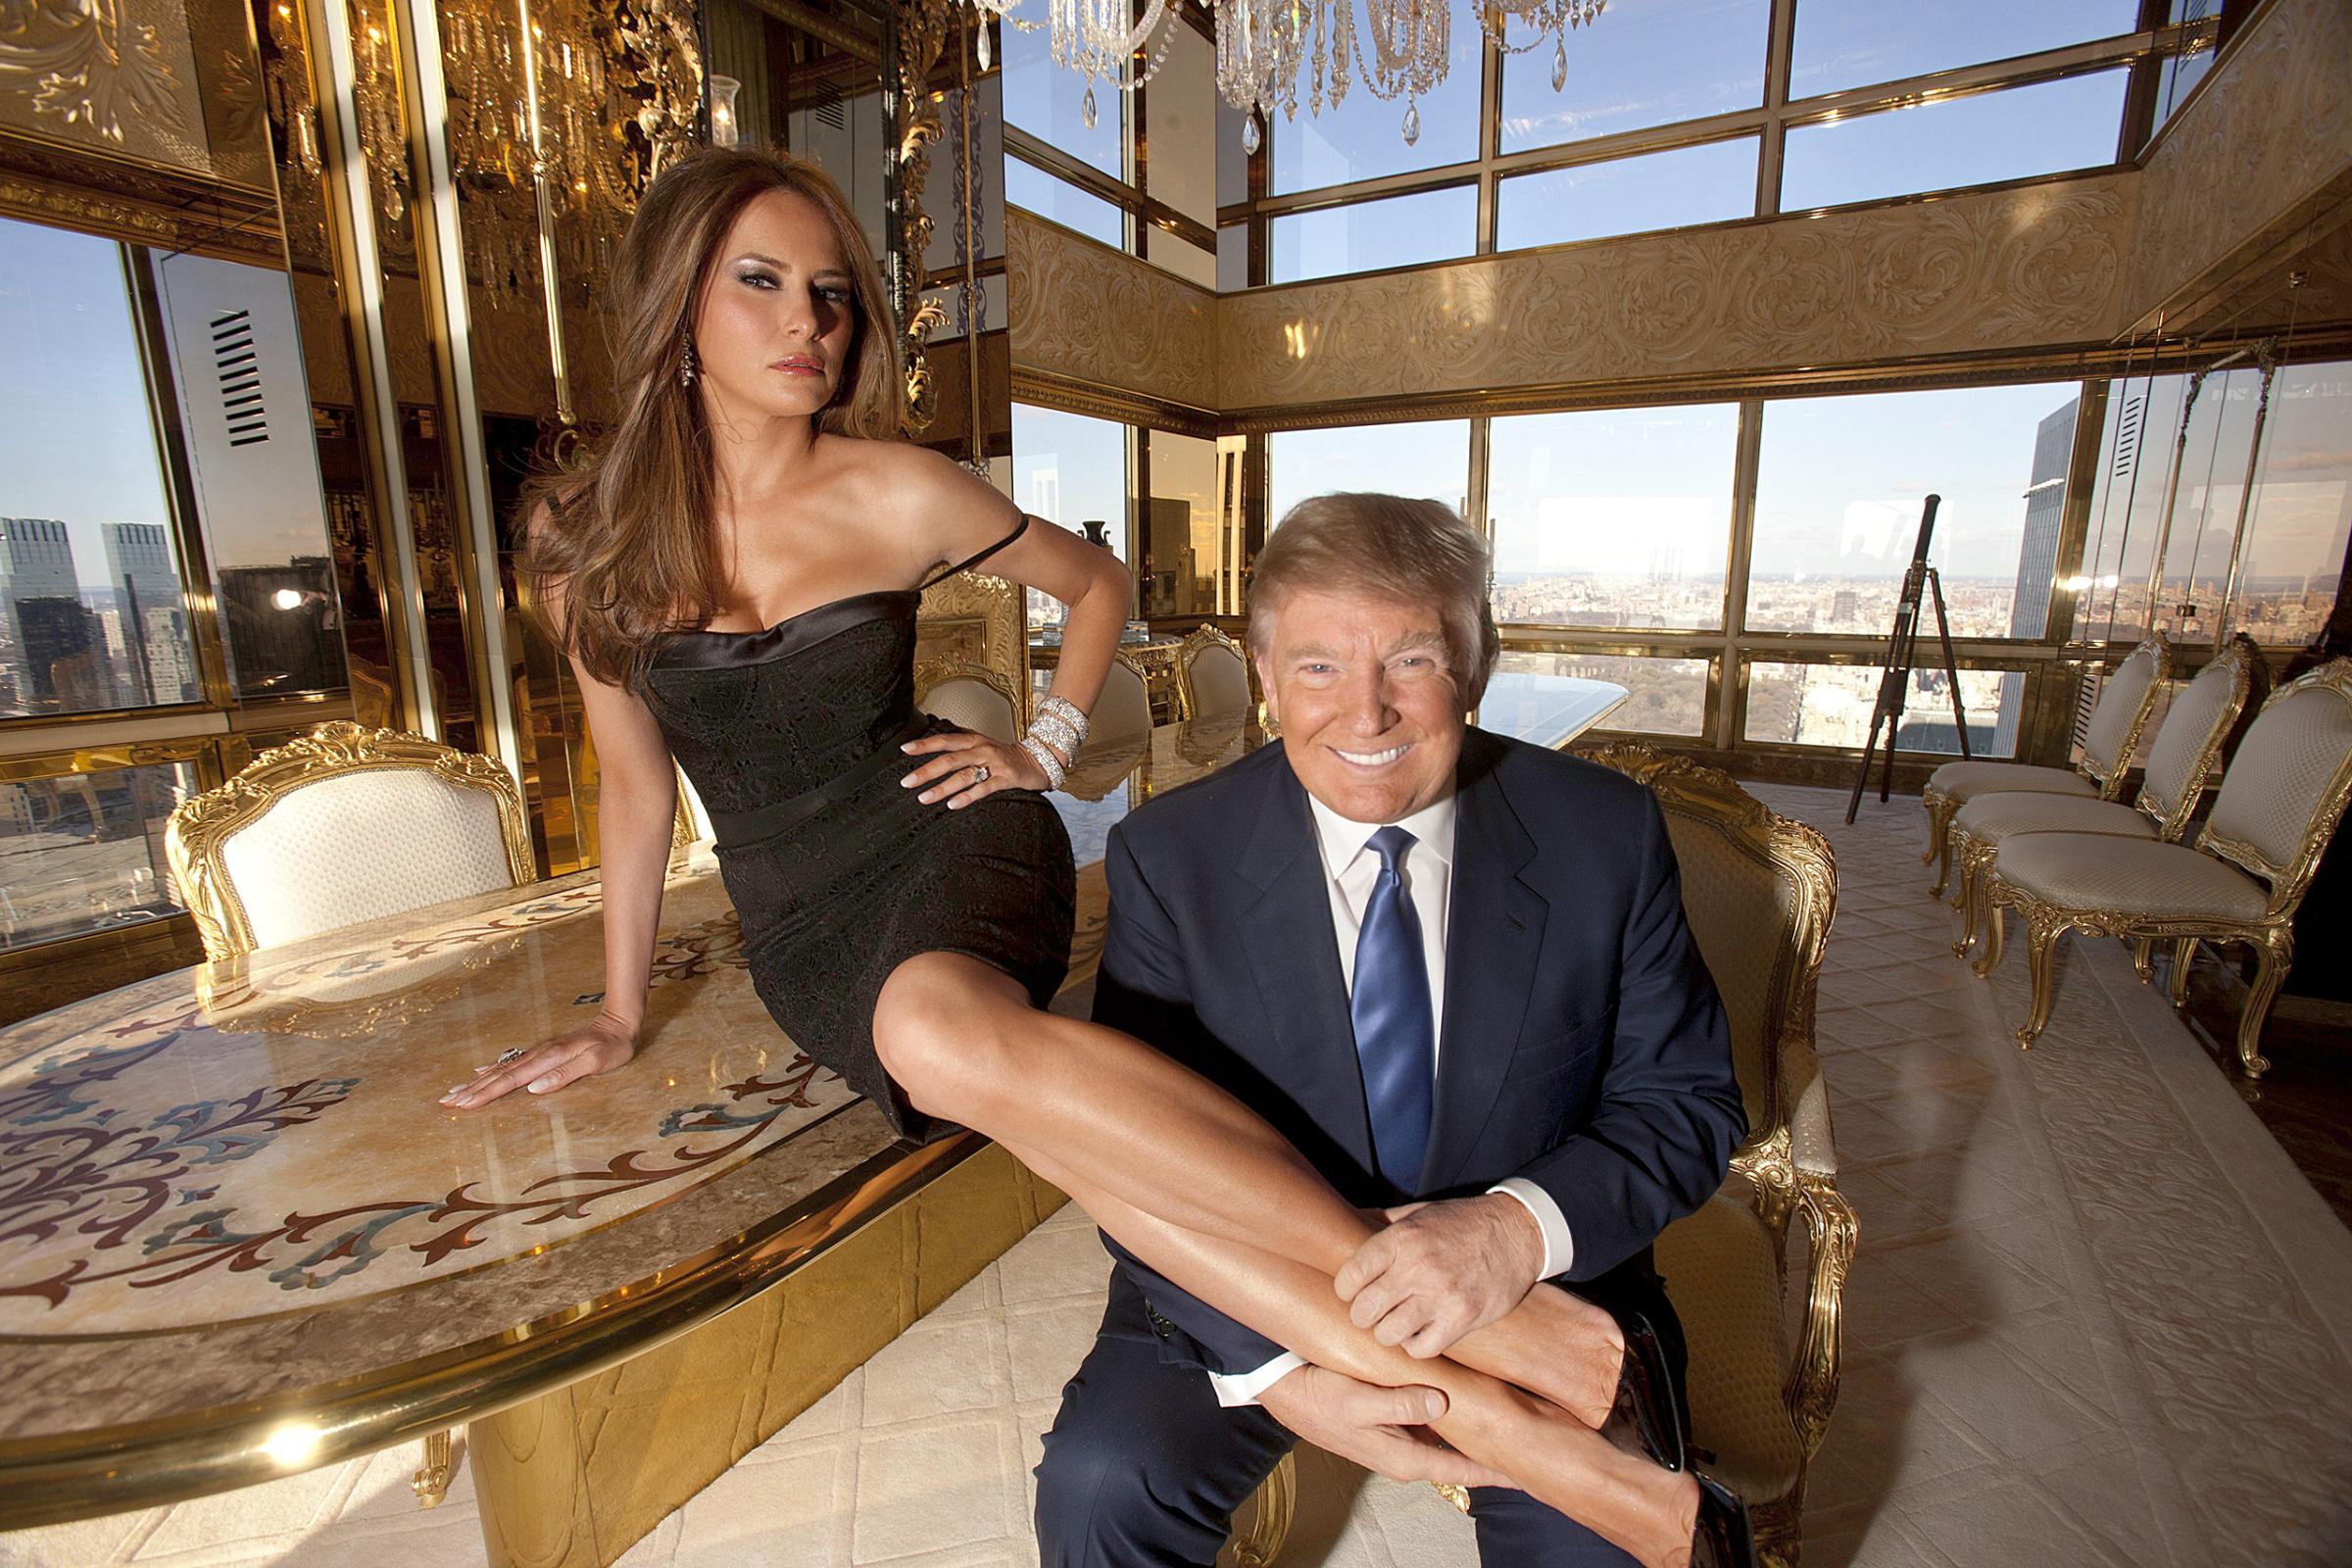 2014 Trump and his wife, Melania, in their apartment at Trump Tower in New York City. “Donald was very proud of her,” Benson said.